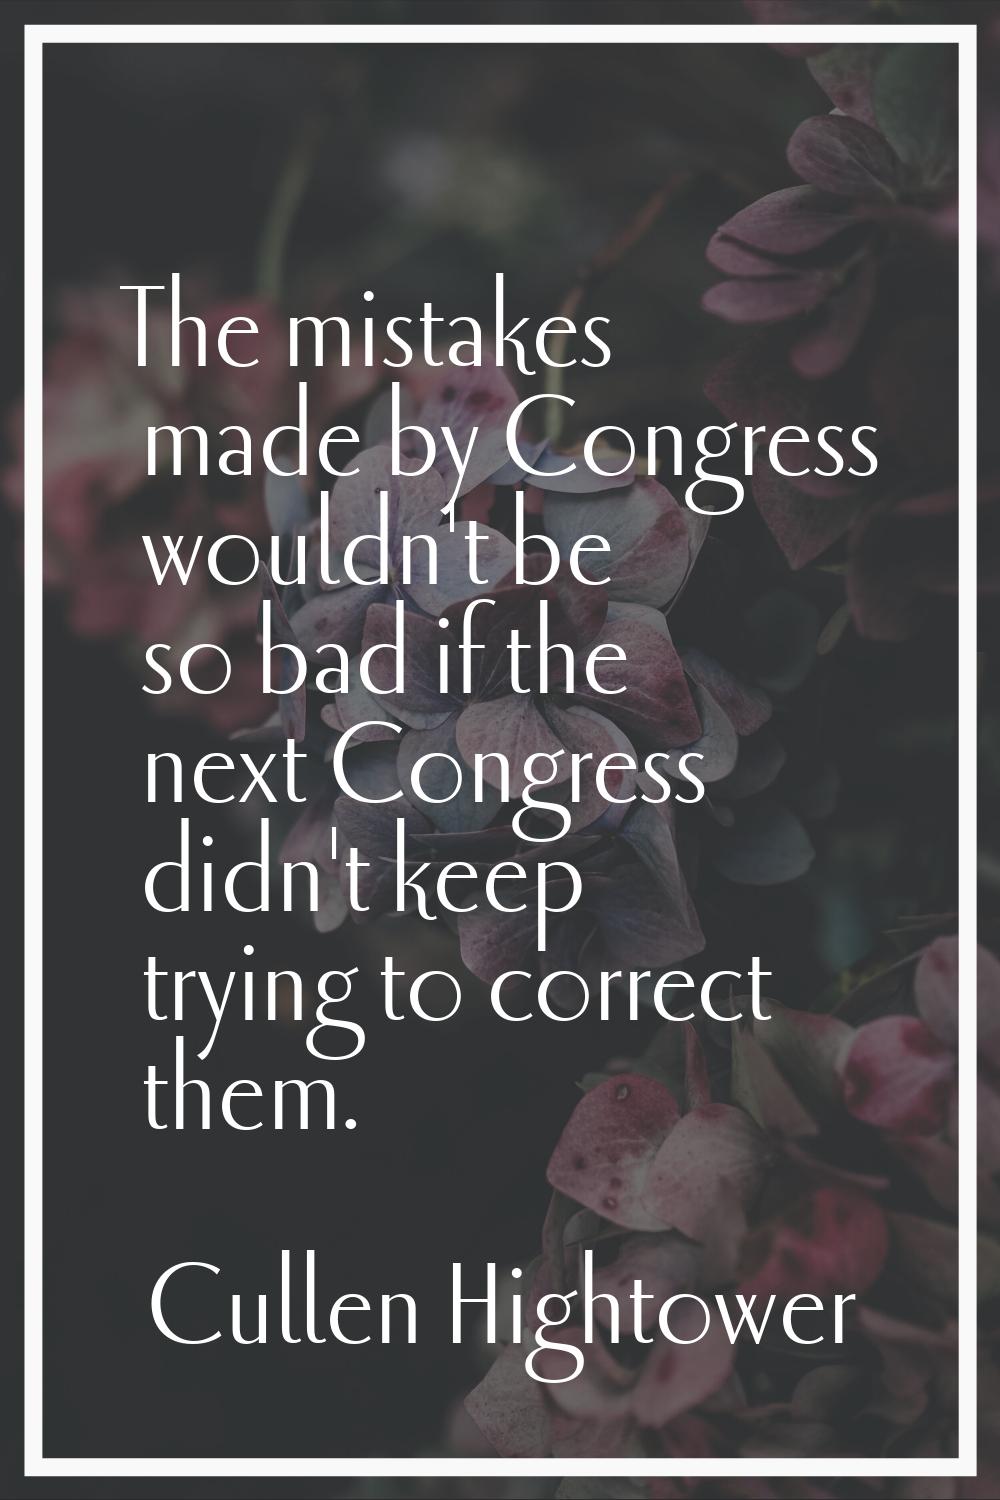 The mistakes made by Congress wouldn't be so bad if the next Congress didn't keep trying to correct